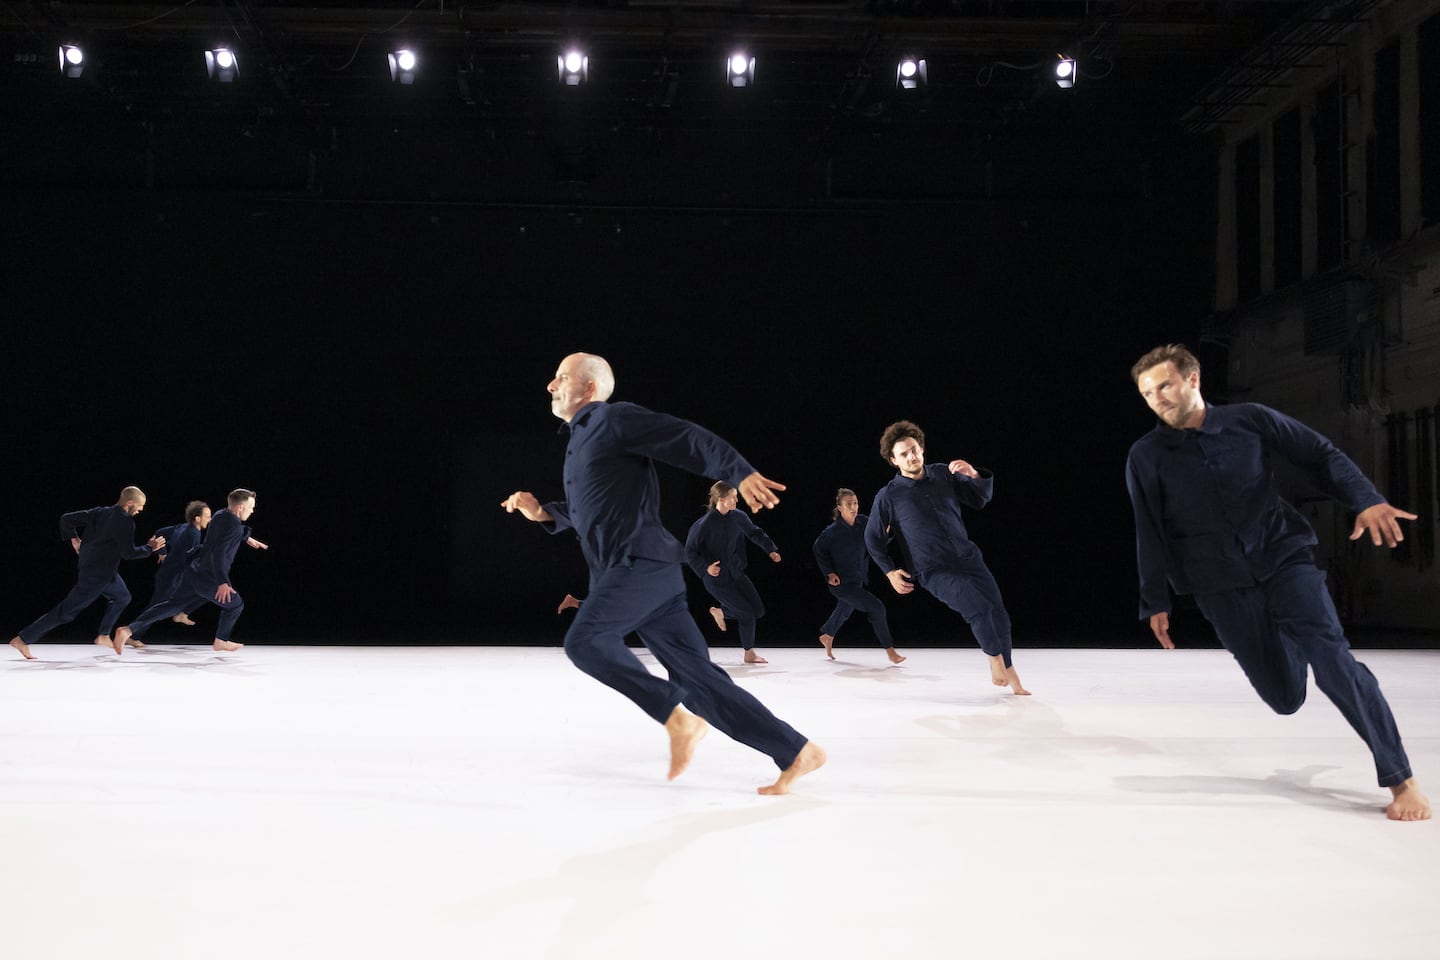 A group of people in navy blue overalls, running full tilt in a circle